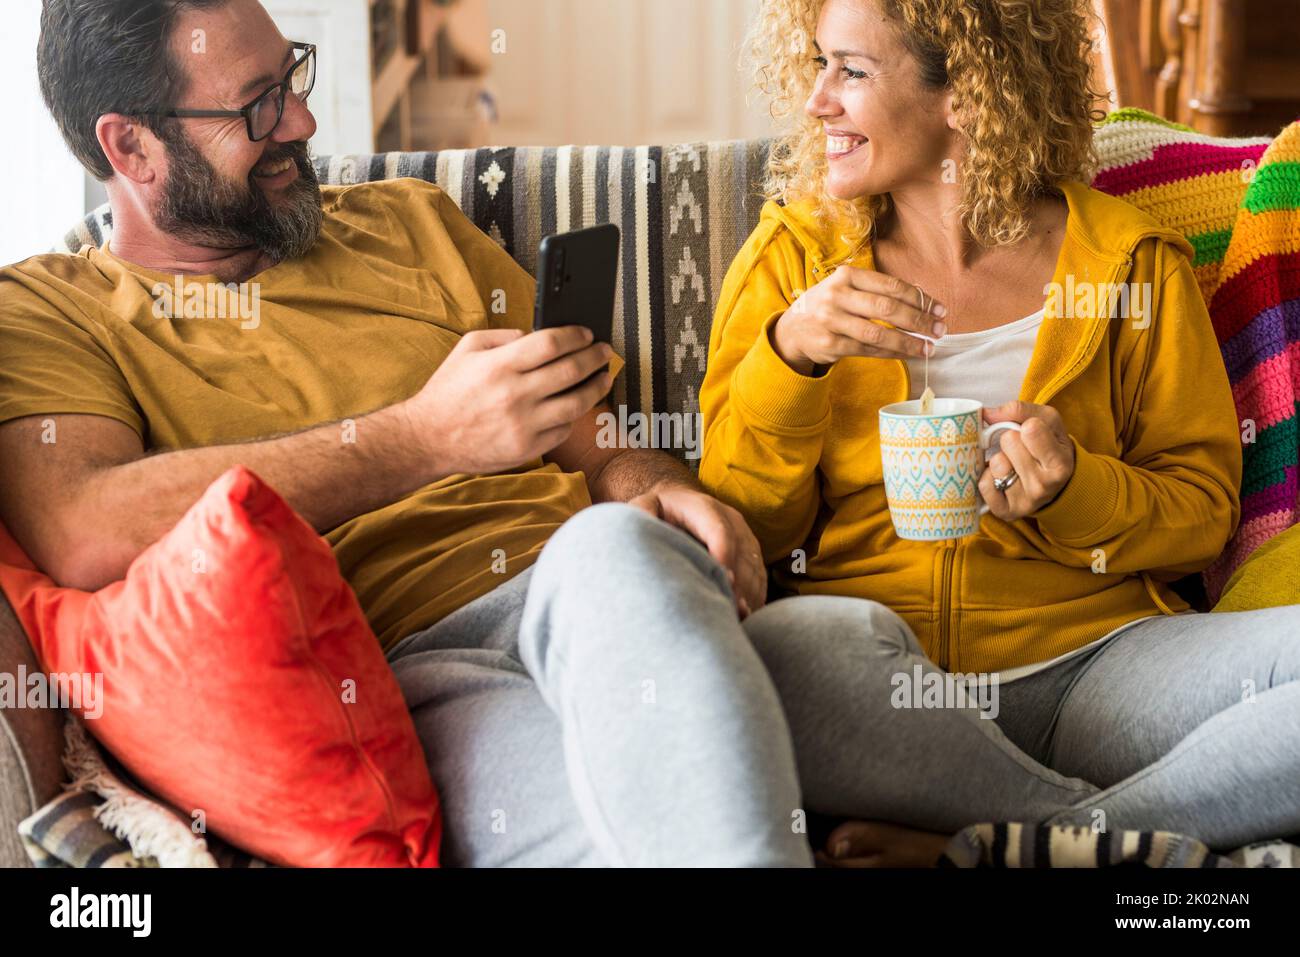 Man and woman smile and enjoy leisure activity at home in morning breakfast time together. People sitting on the sofa in apartment for real life. Couple use phone and drink tea having fun on the couch Stock Photo